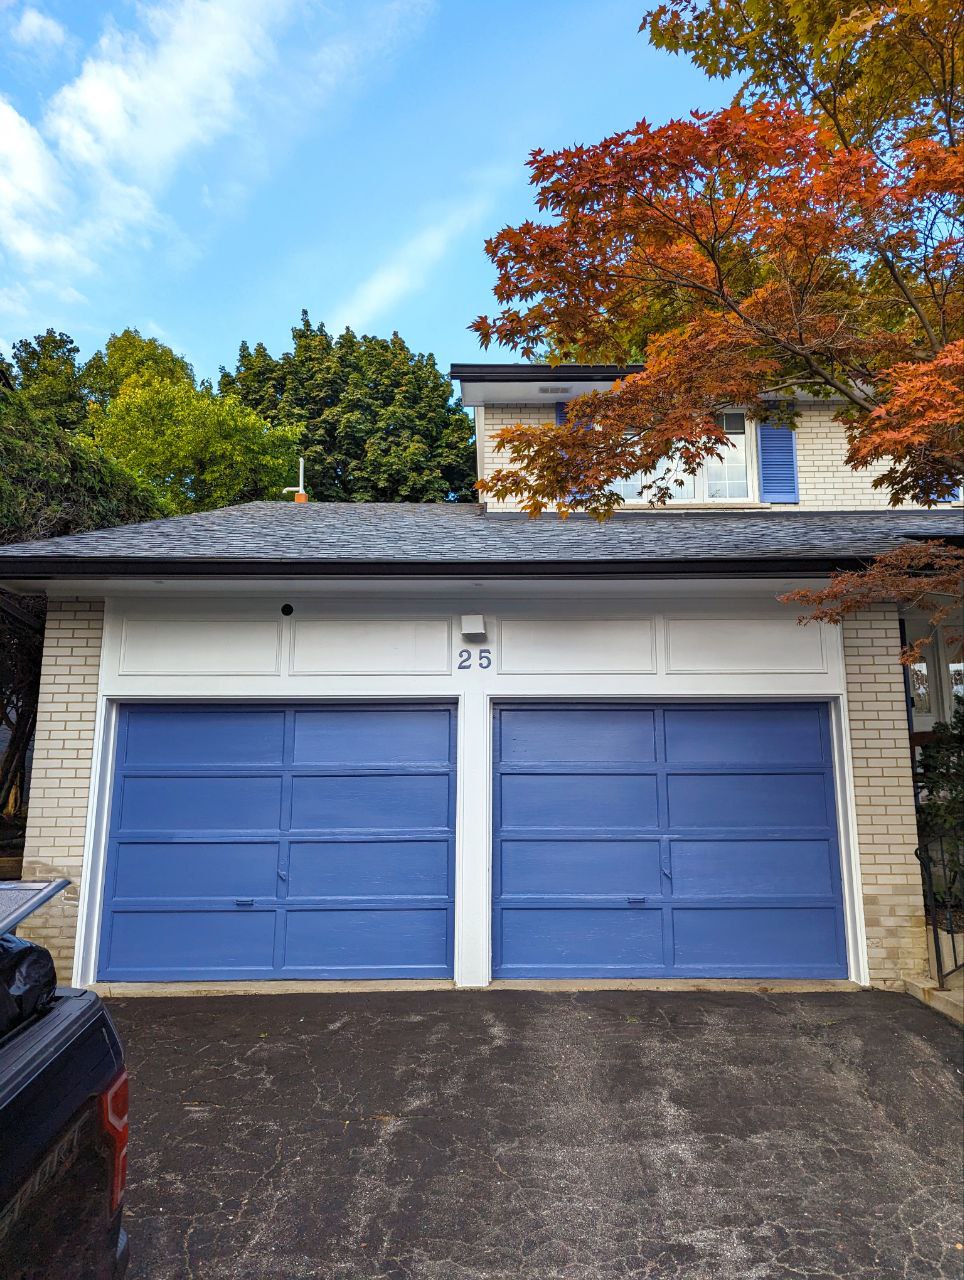 Exterior painting project in North York, Toronto: a double garage door and window shutters spray painted in a nice rich blue by BenjaminMoore and the fascia, suffit, and windows freshened up in the existing white colour.